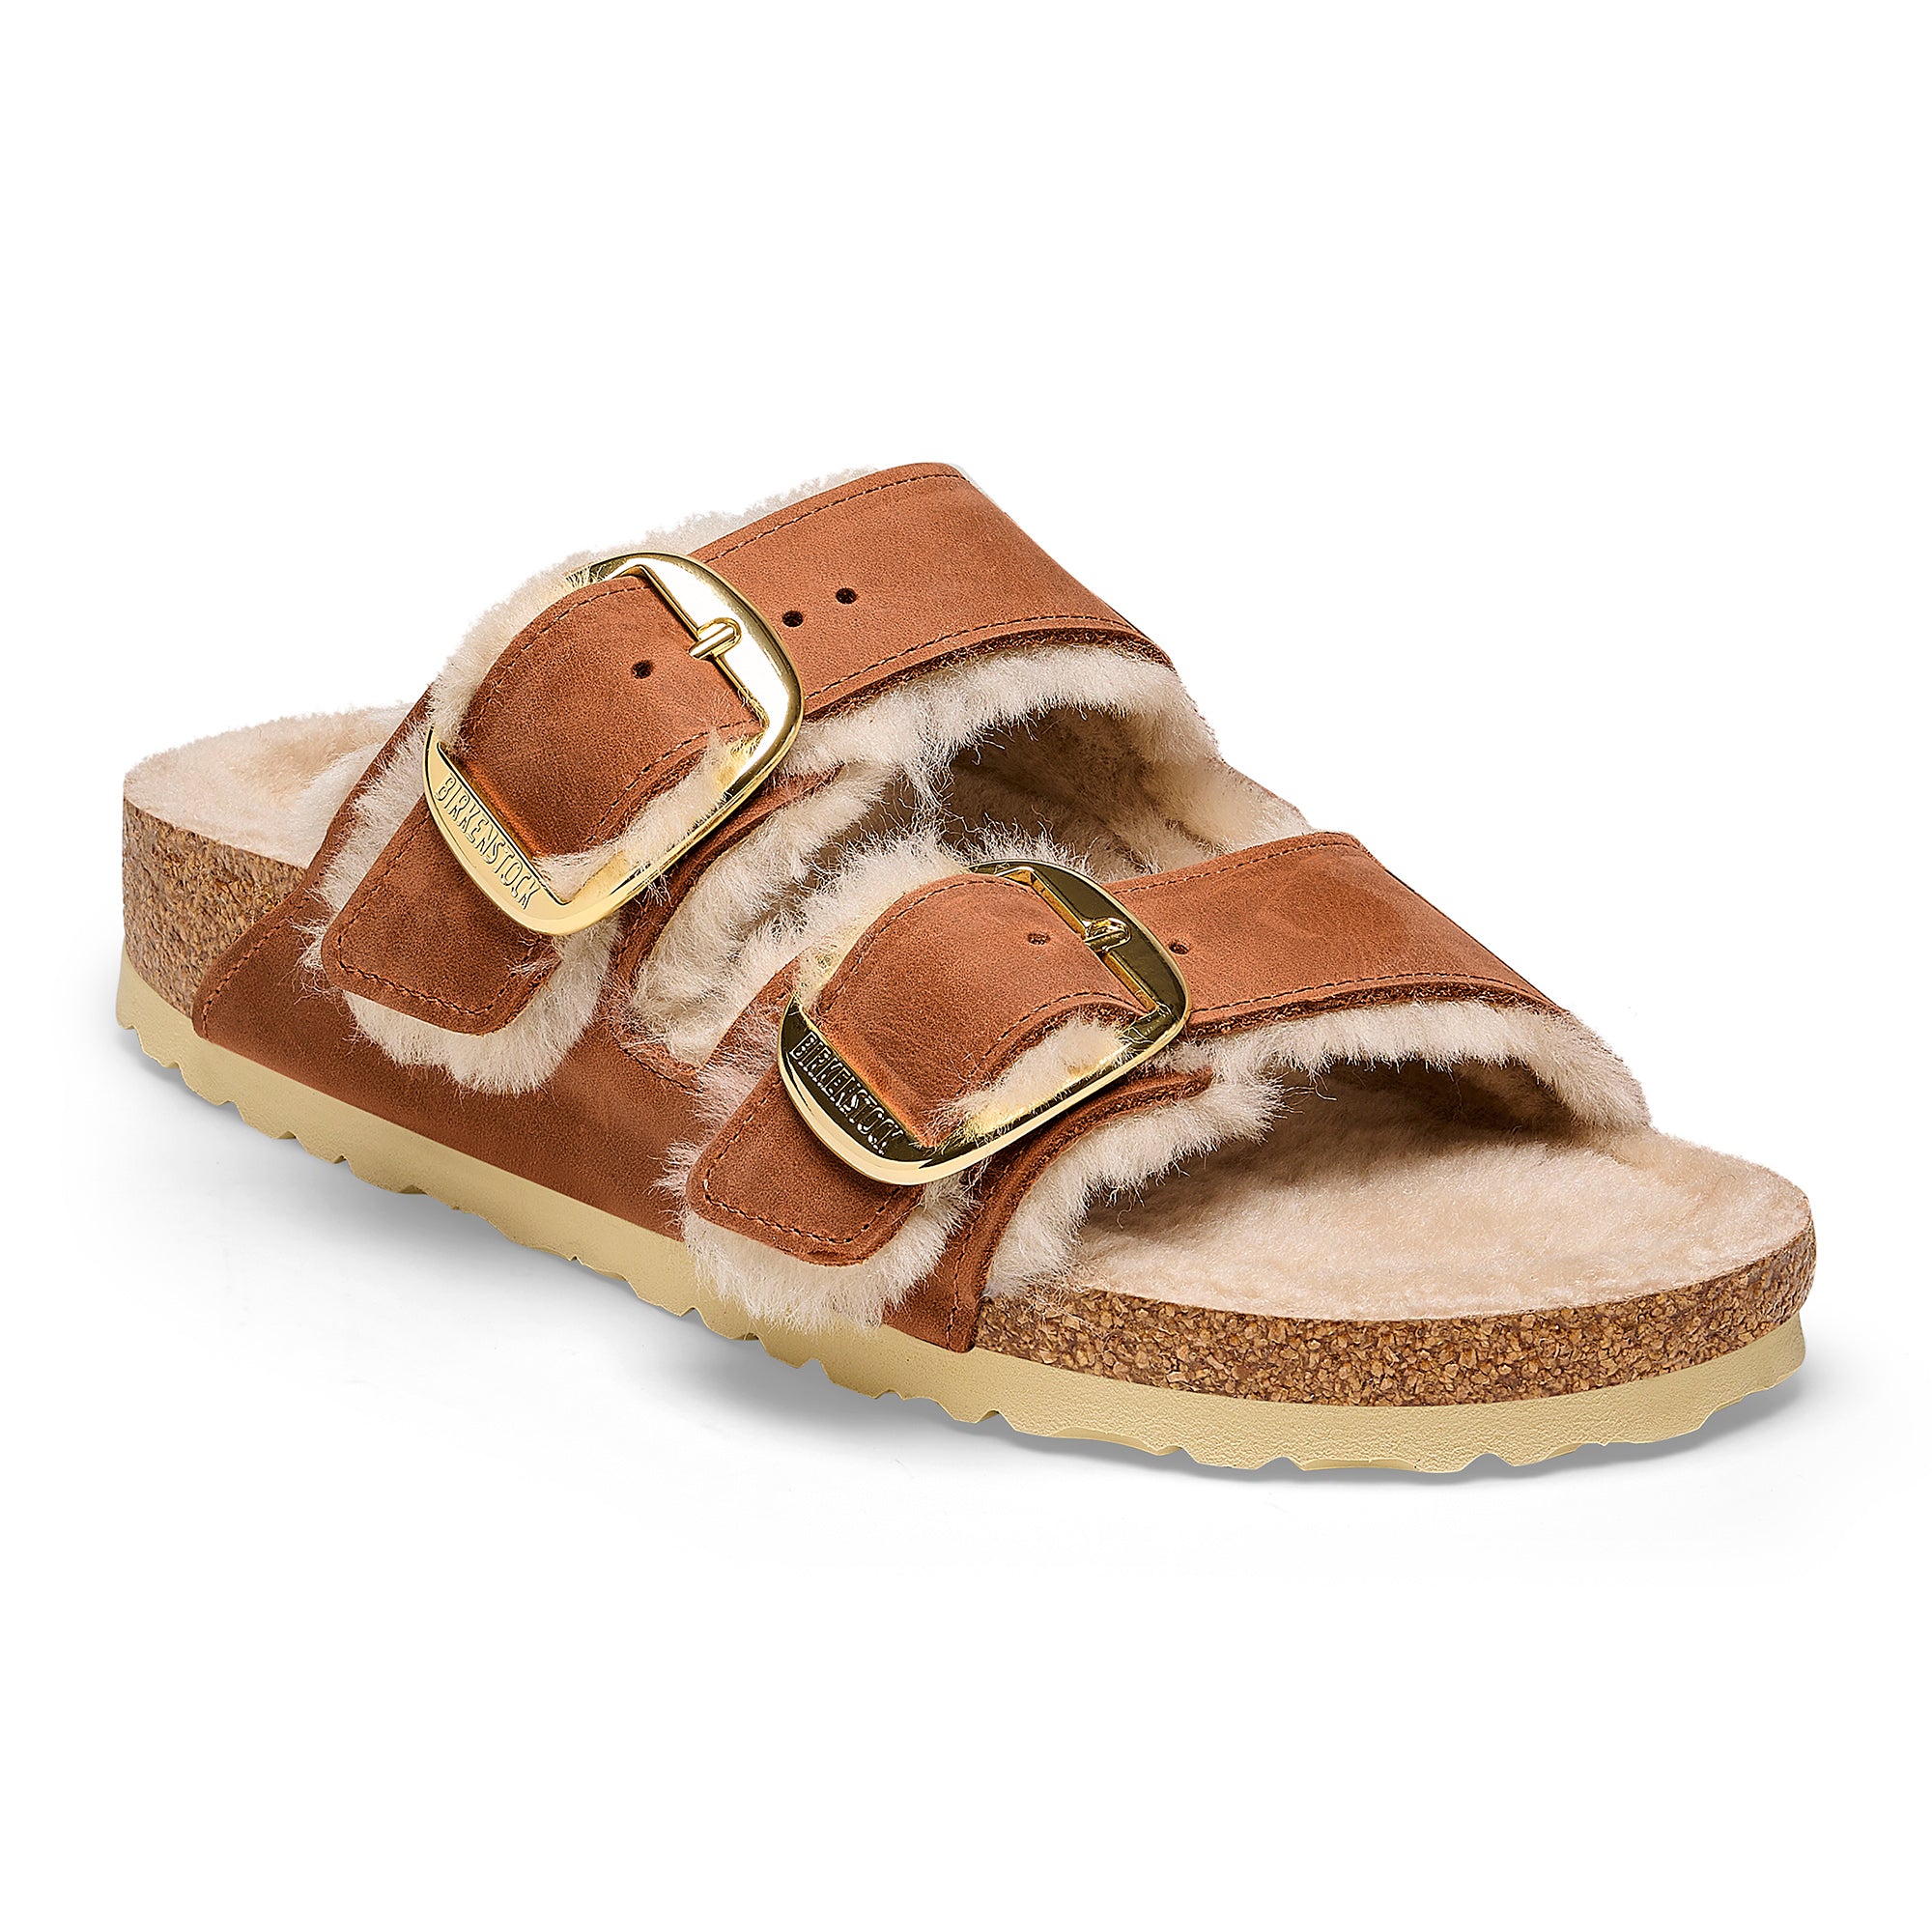 Birkenstock Limited Edition Arizona Big Buckle cognac oiled leather/natural shearling